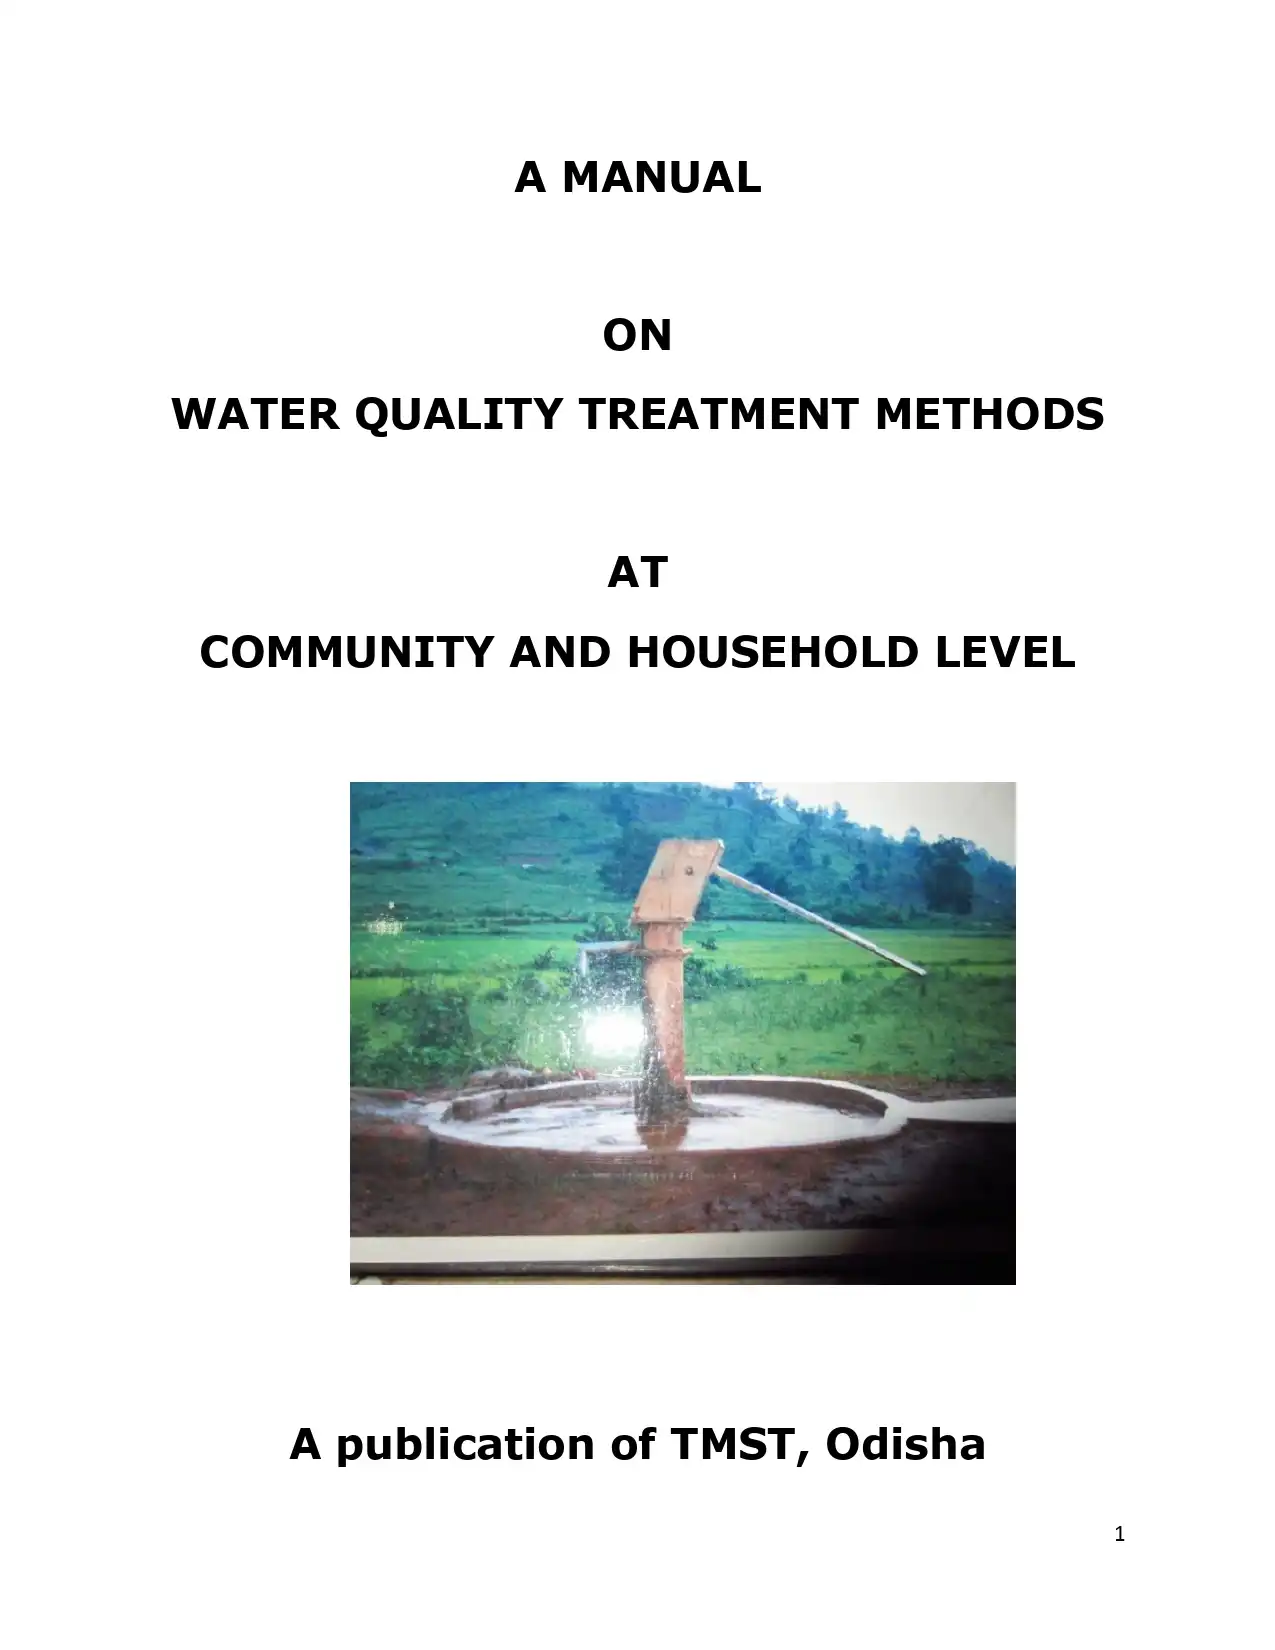 A Manual On Water Quality Treatment Methods At Community And Household Level